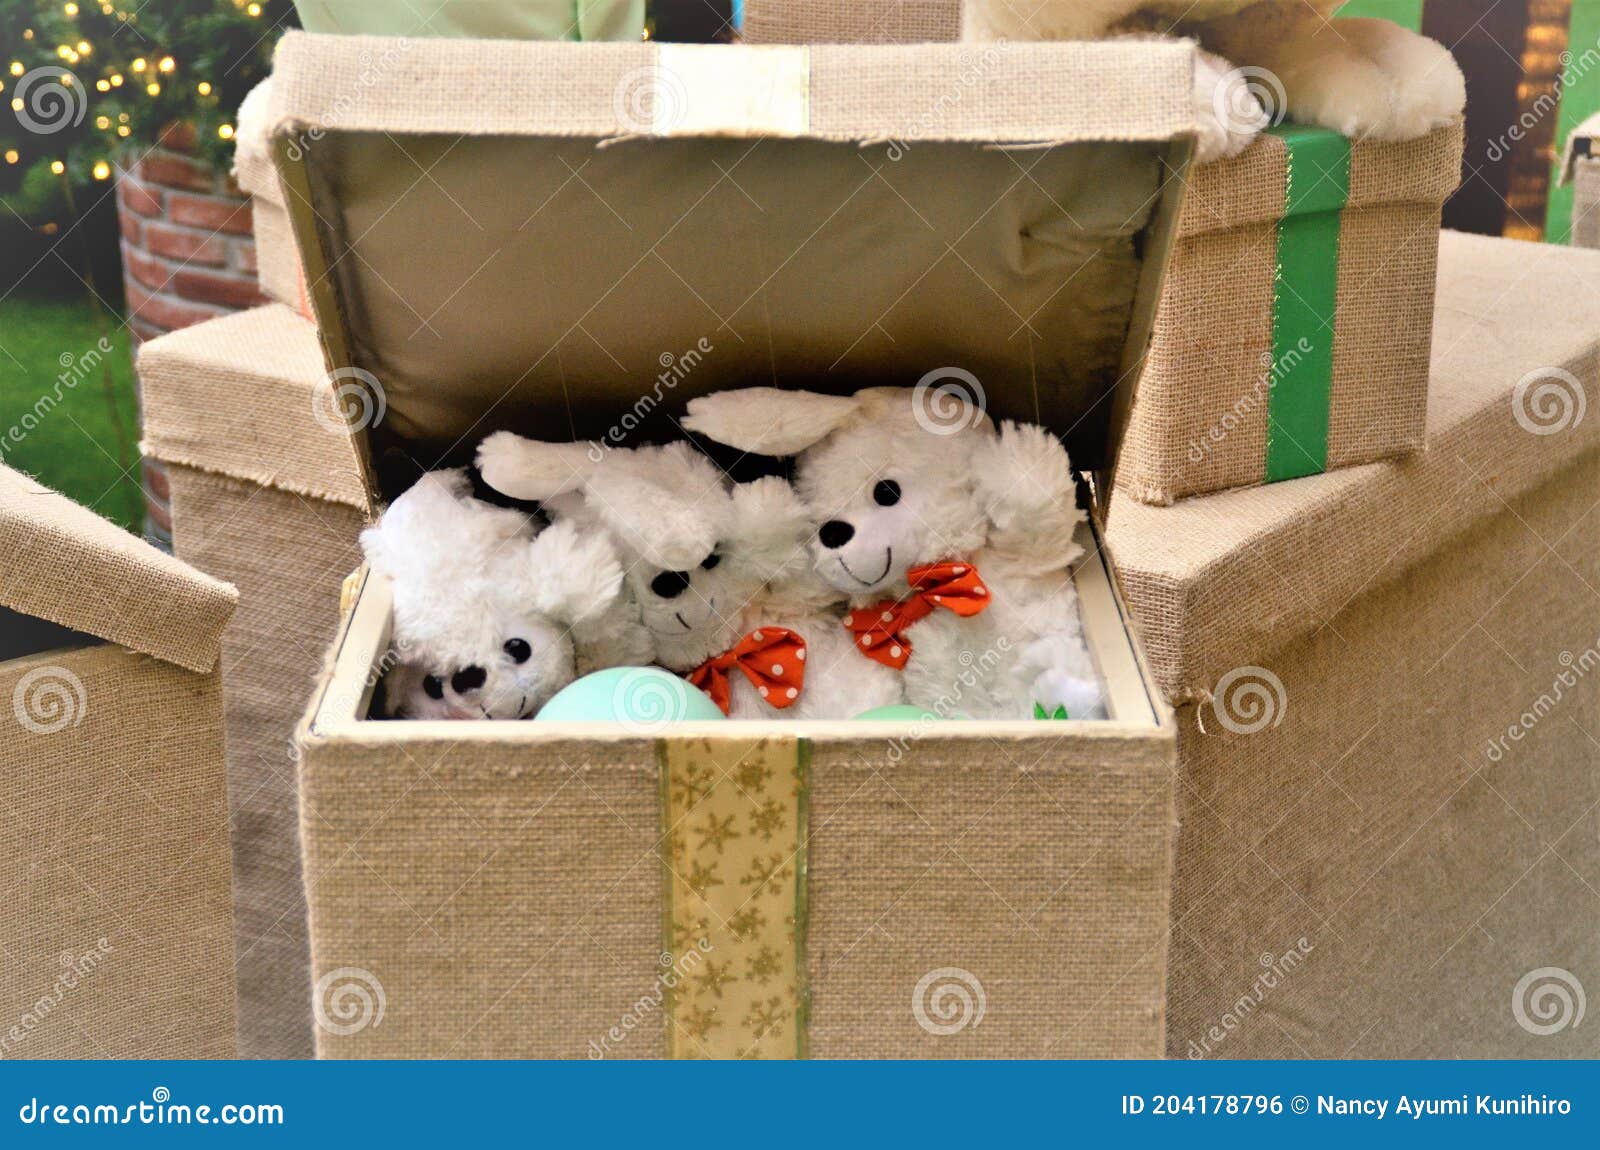 gift box with plush bunny puppies